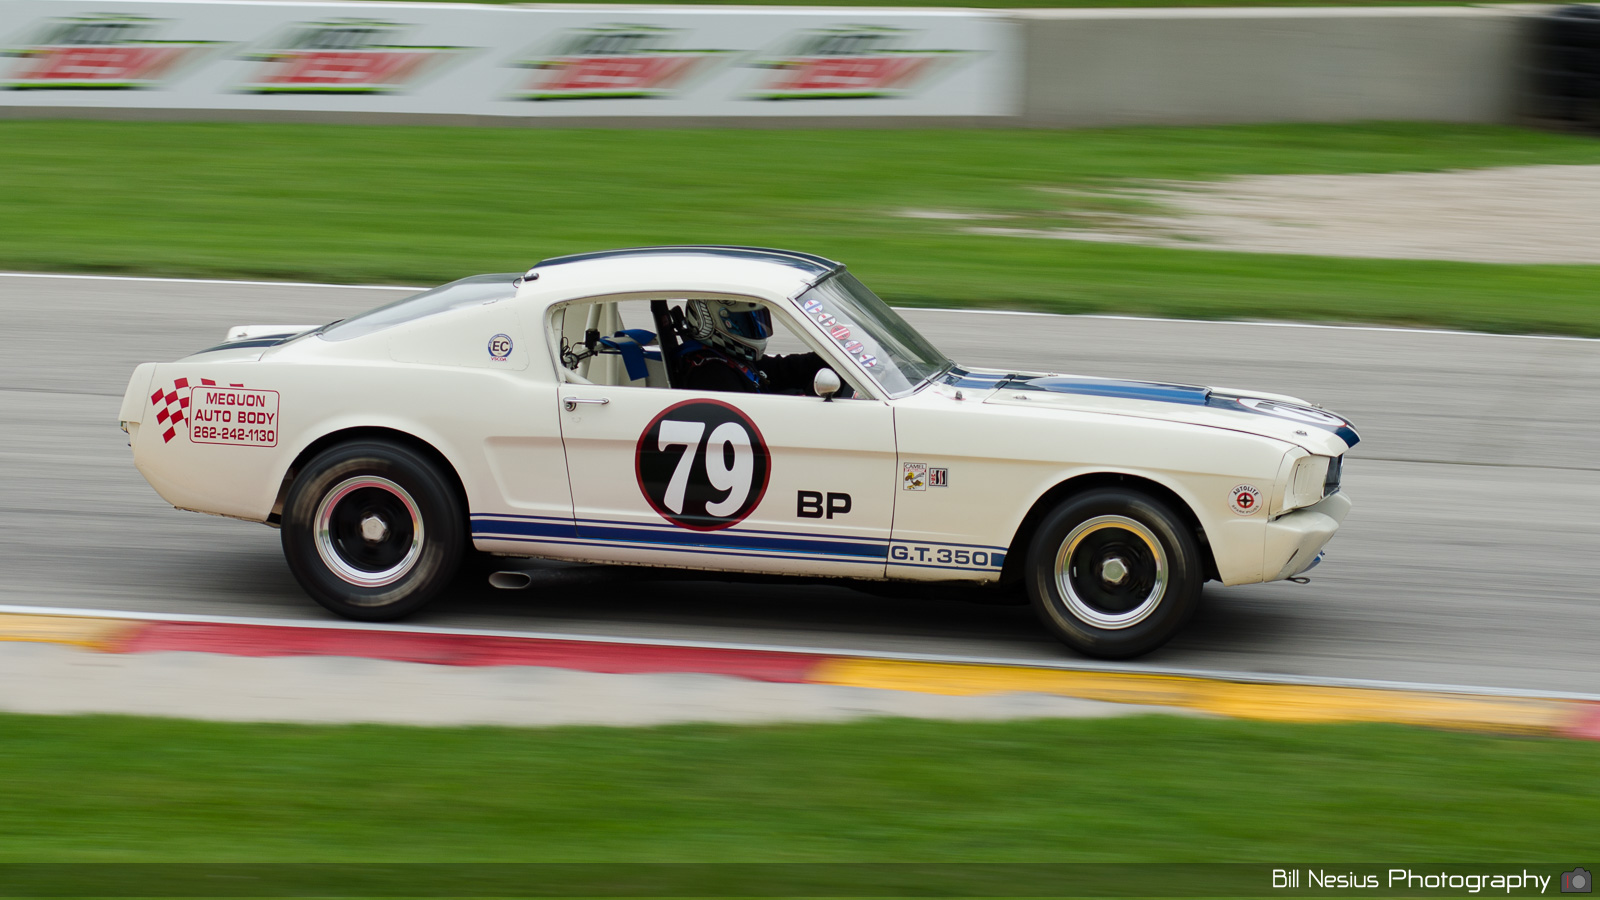 Ford Mustang Shelby GT350 Number 79 / DSC_1882 / 4